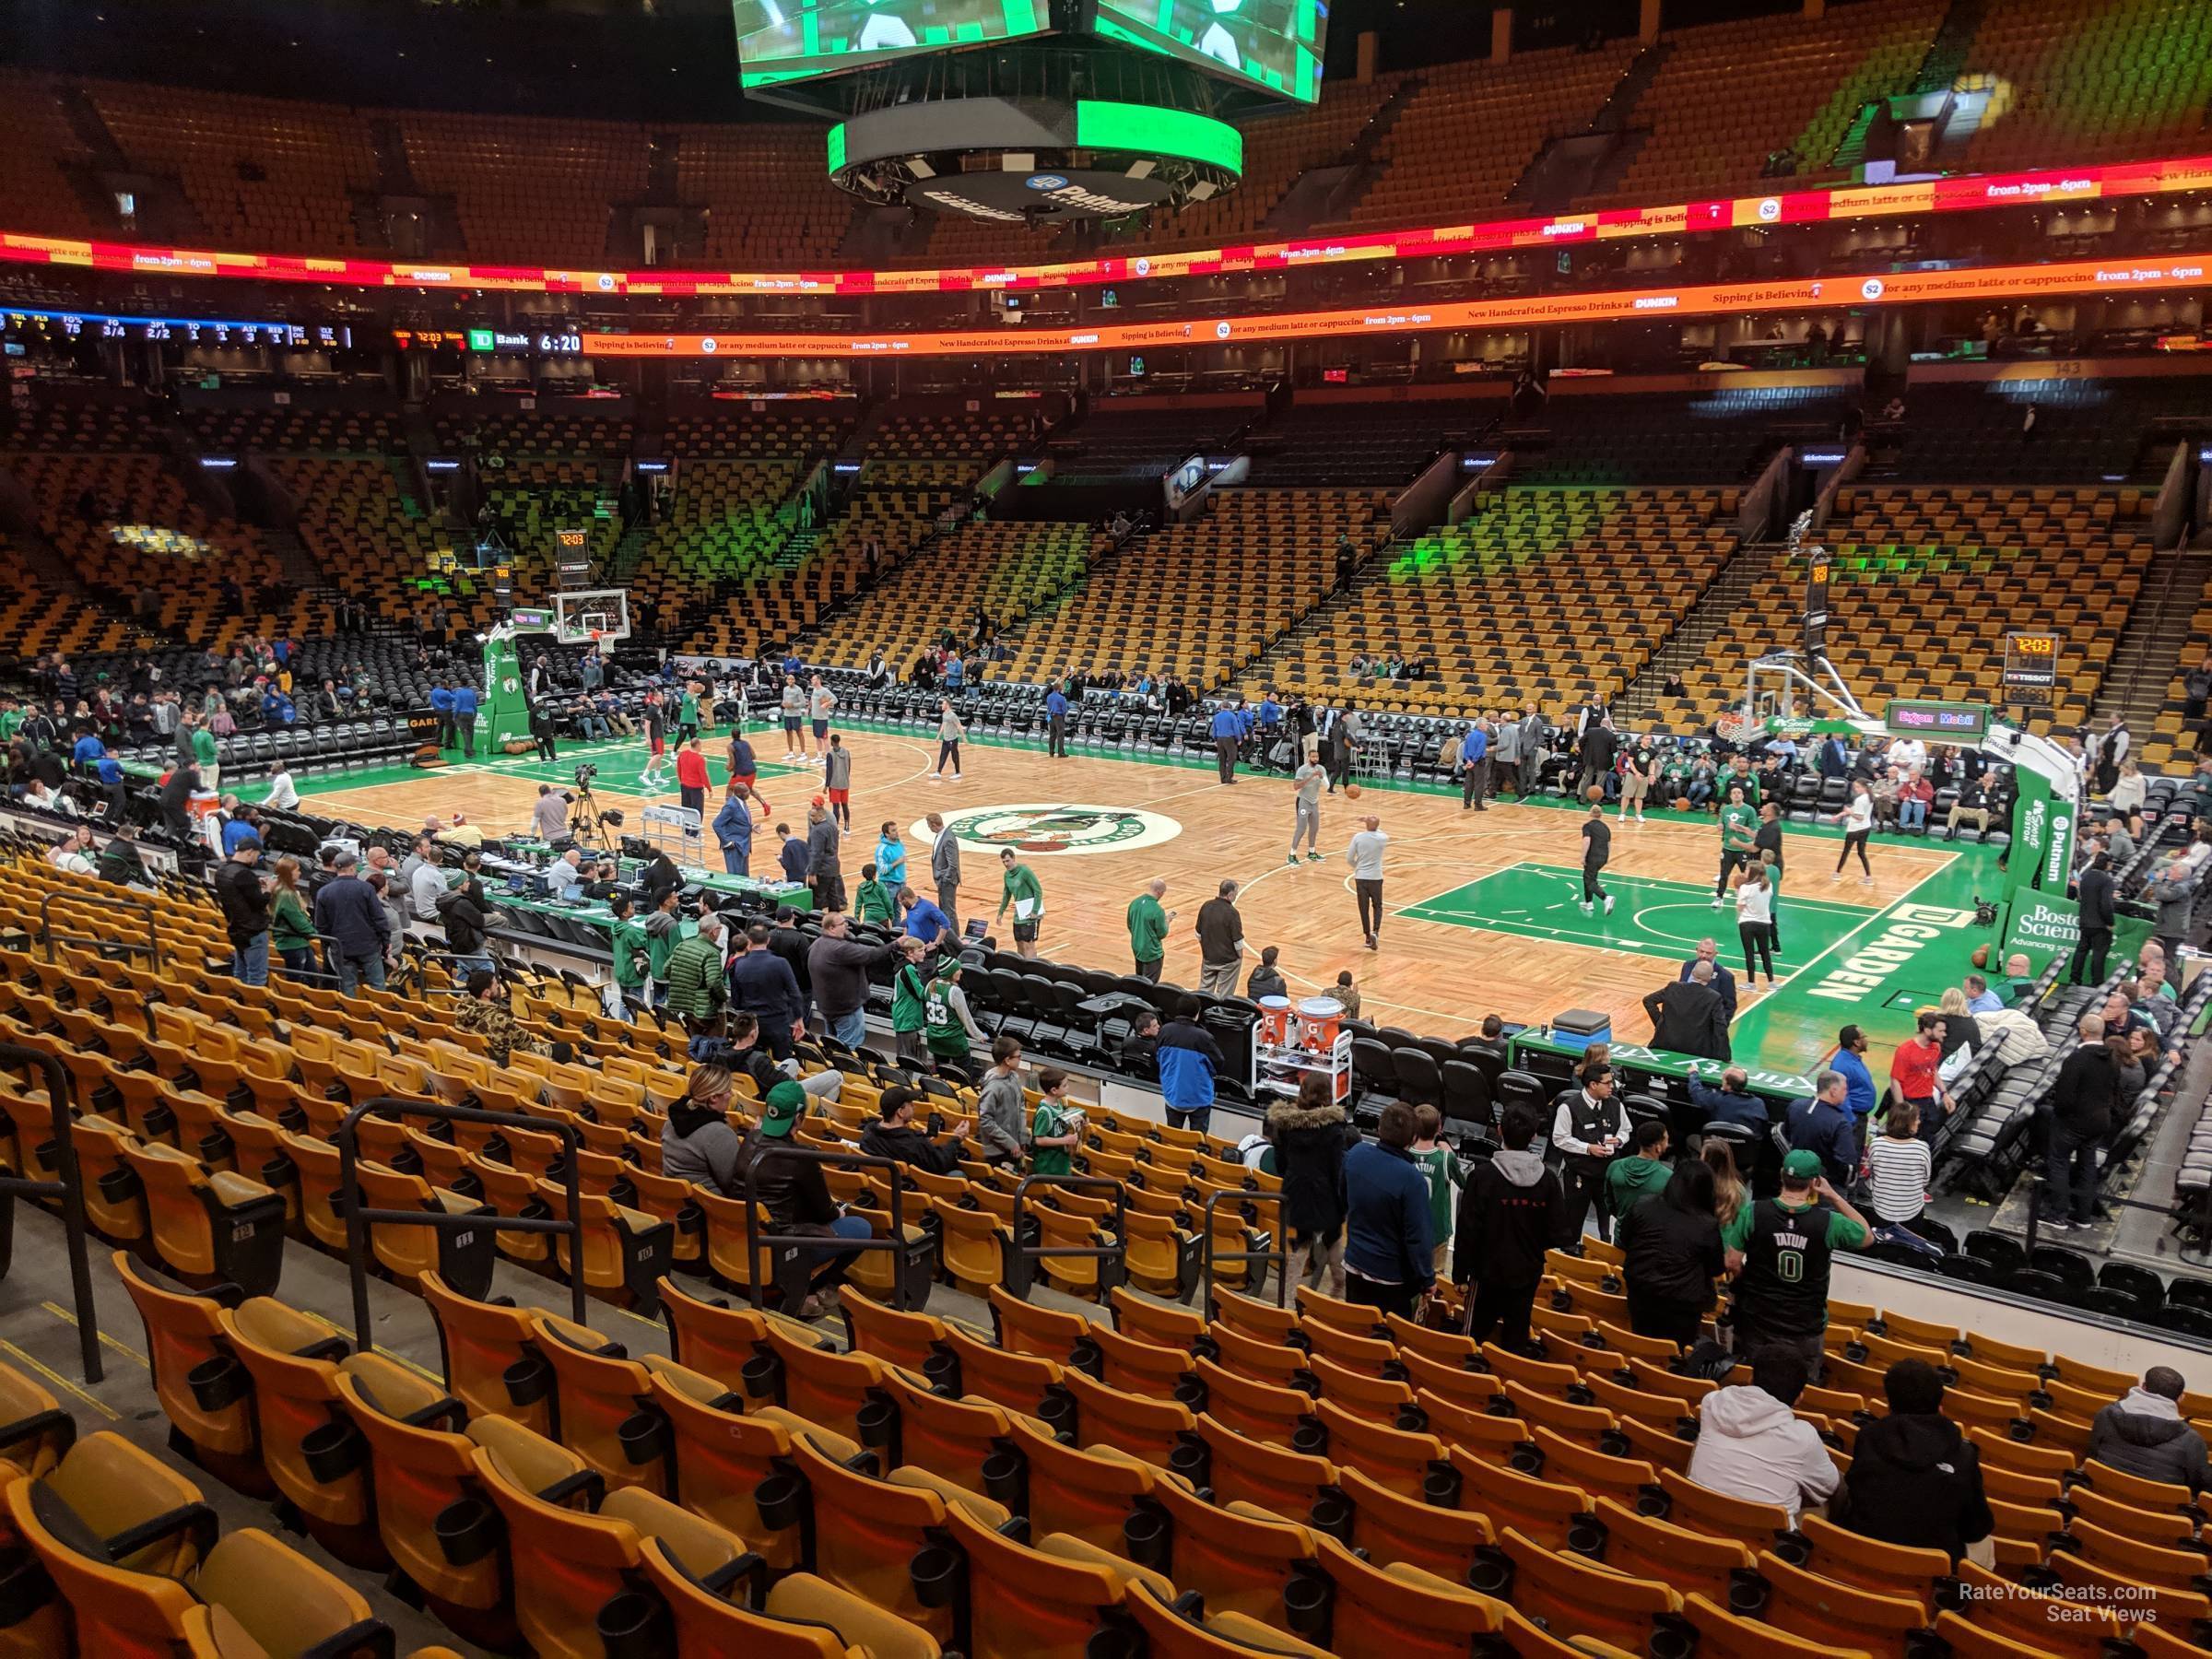 loge 21, row 16 seat view  for basketball - td garden